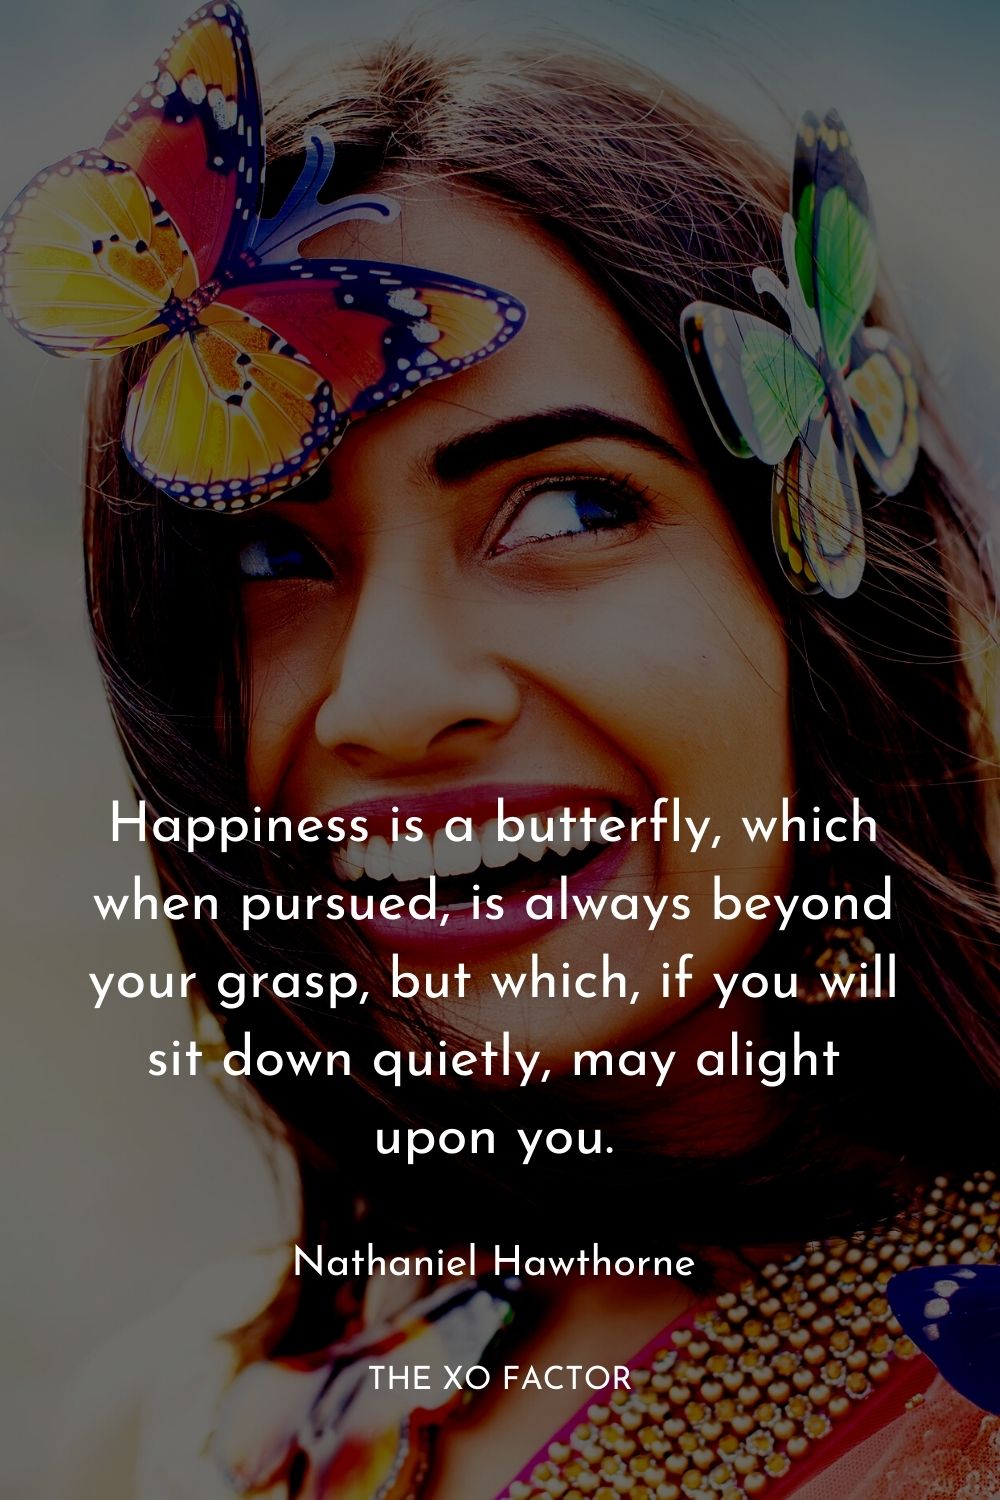 Happiness is a butterfly, which when pursued, is always beyond your grasp, but which, if you will sit down quietly, may alight upon you.